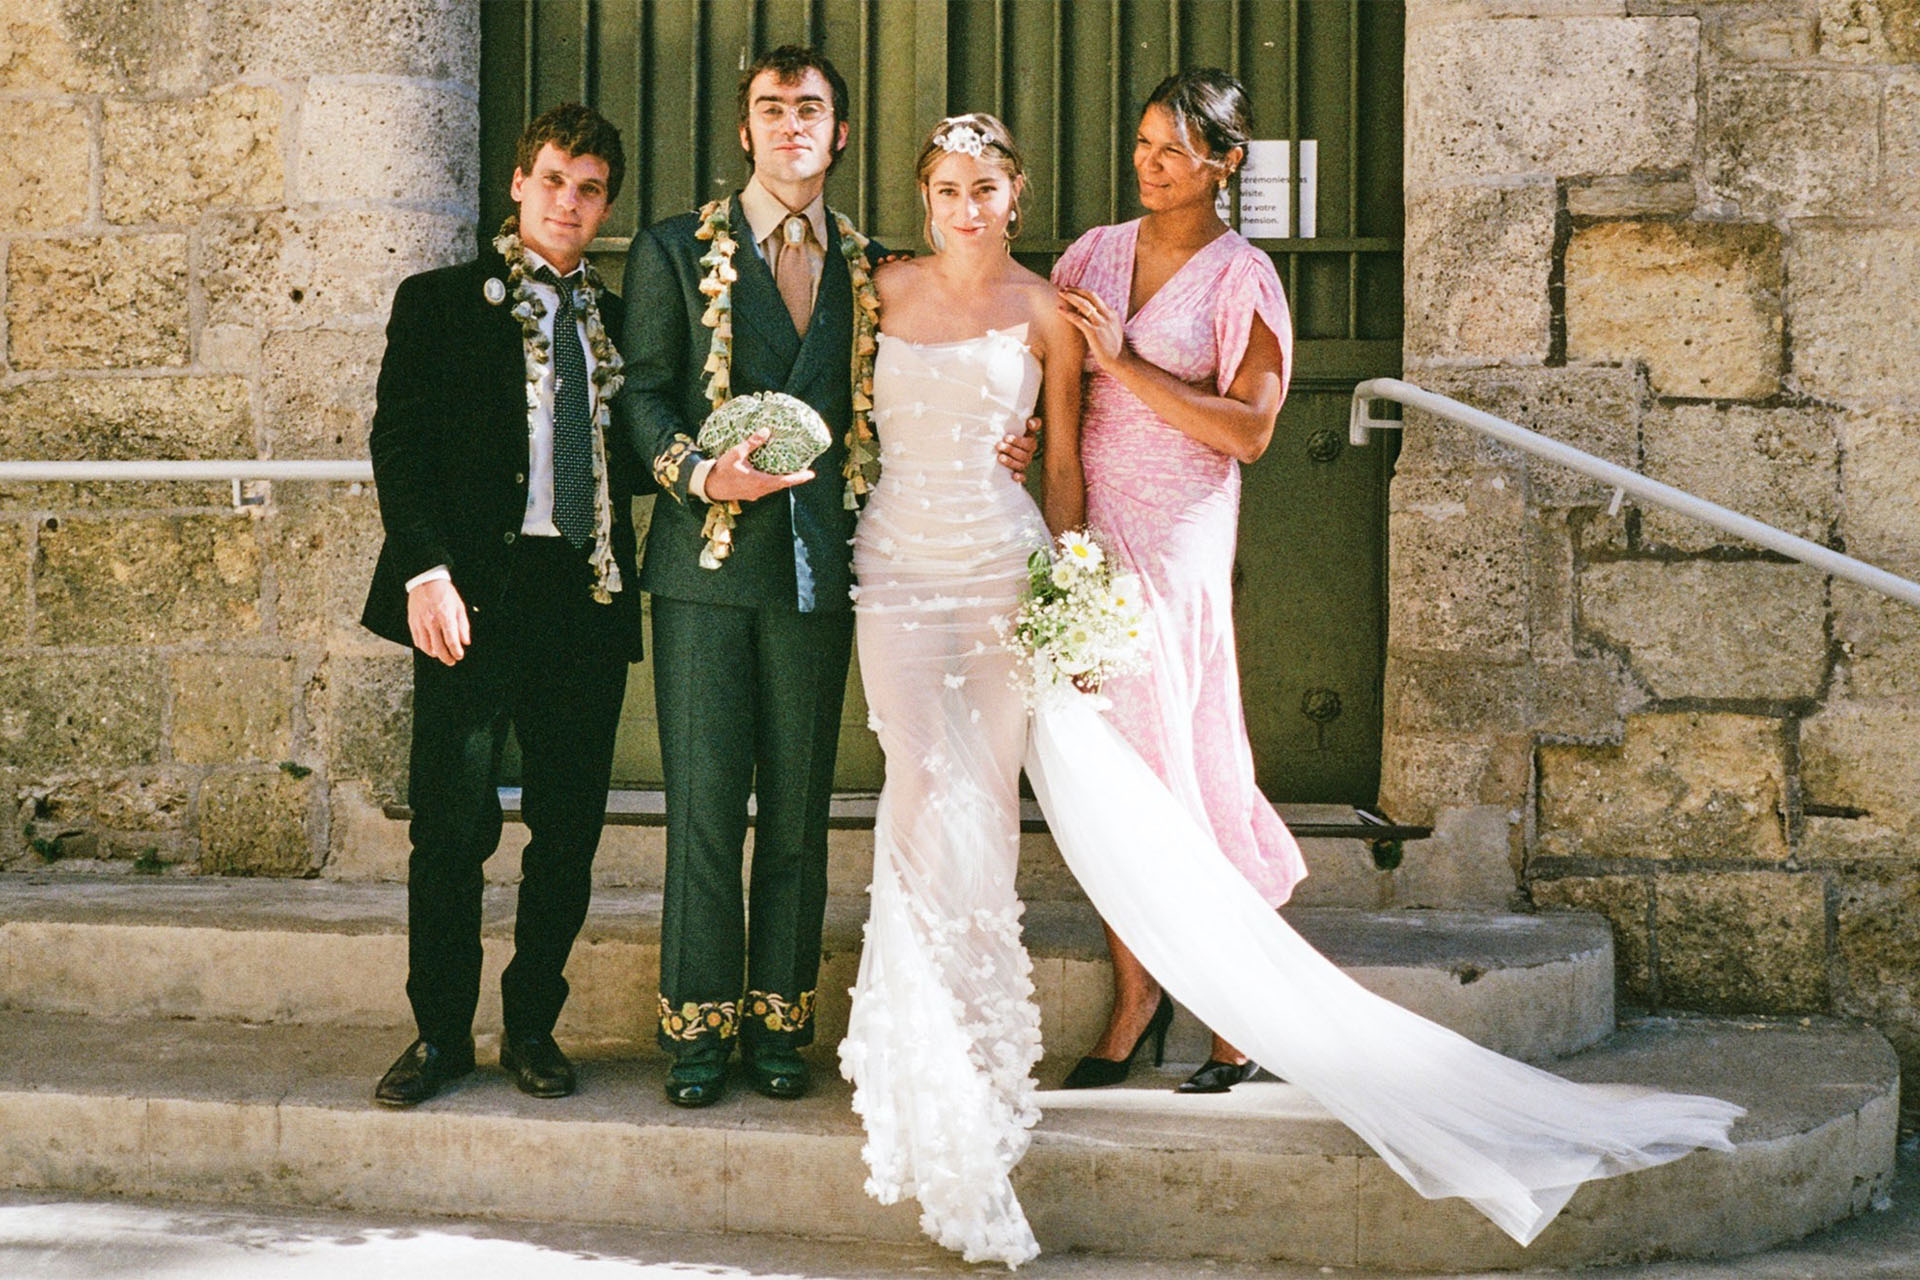 The Bride Wore A “Naked” Dress To Her Wedding At A Medieval Castle In The South of France picture